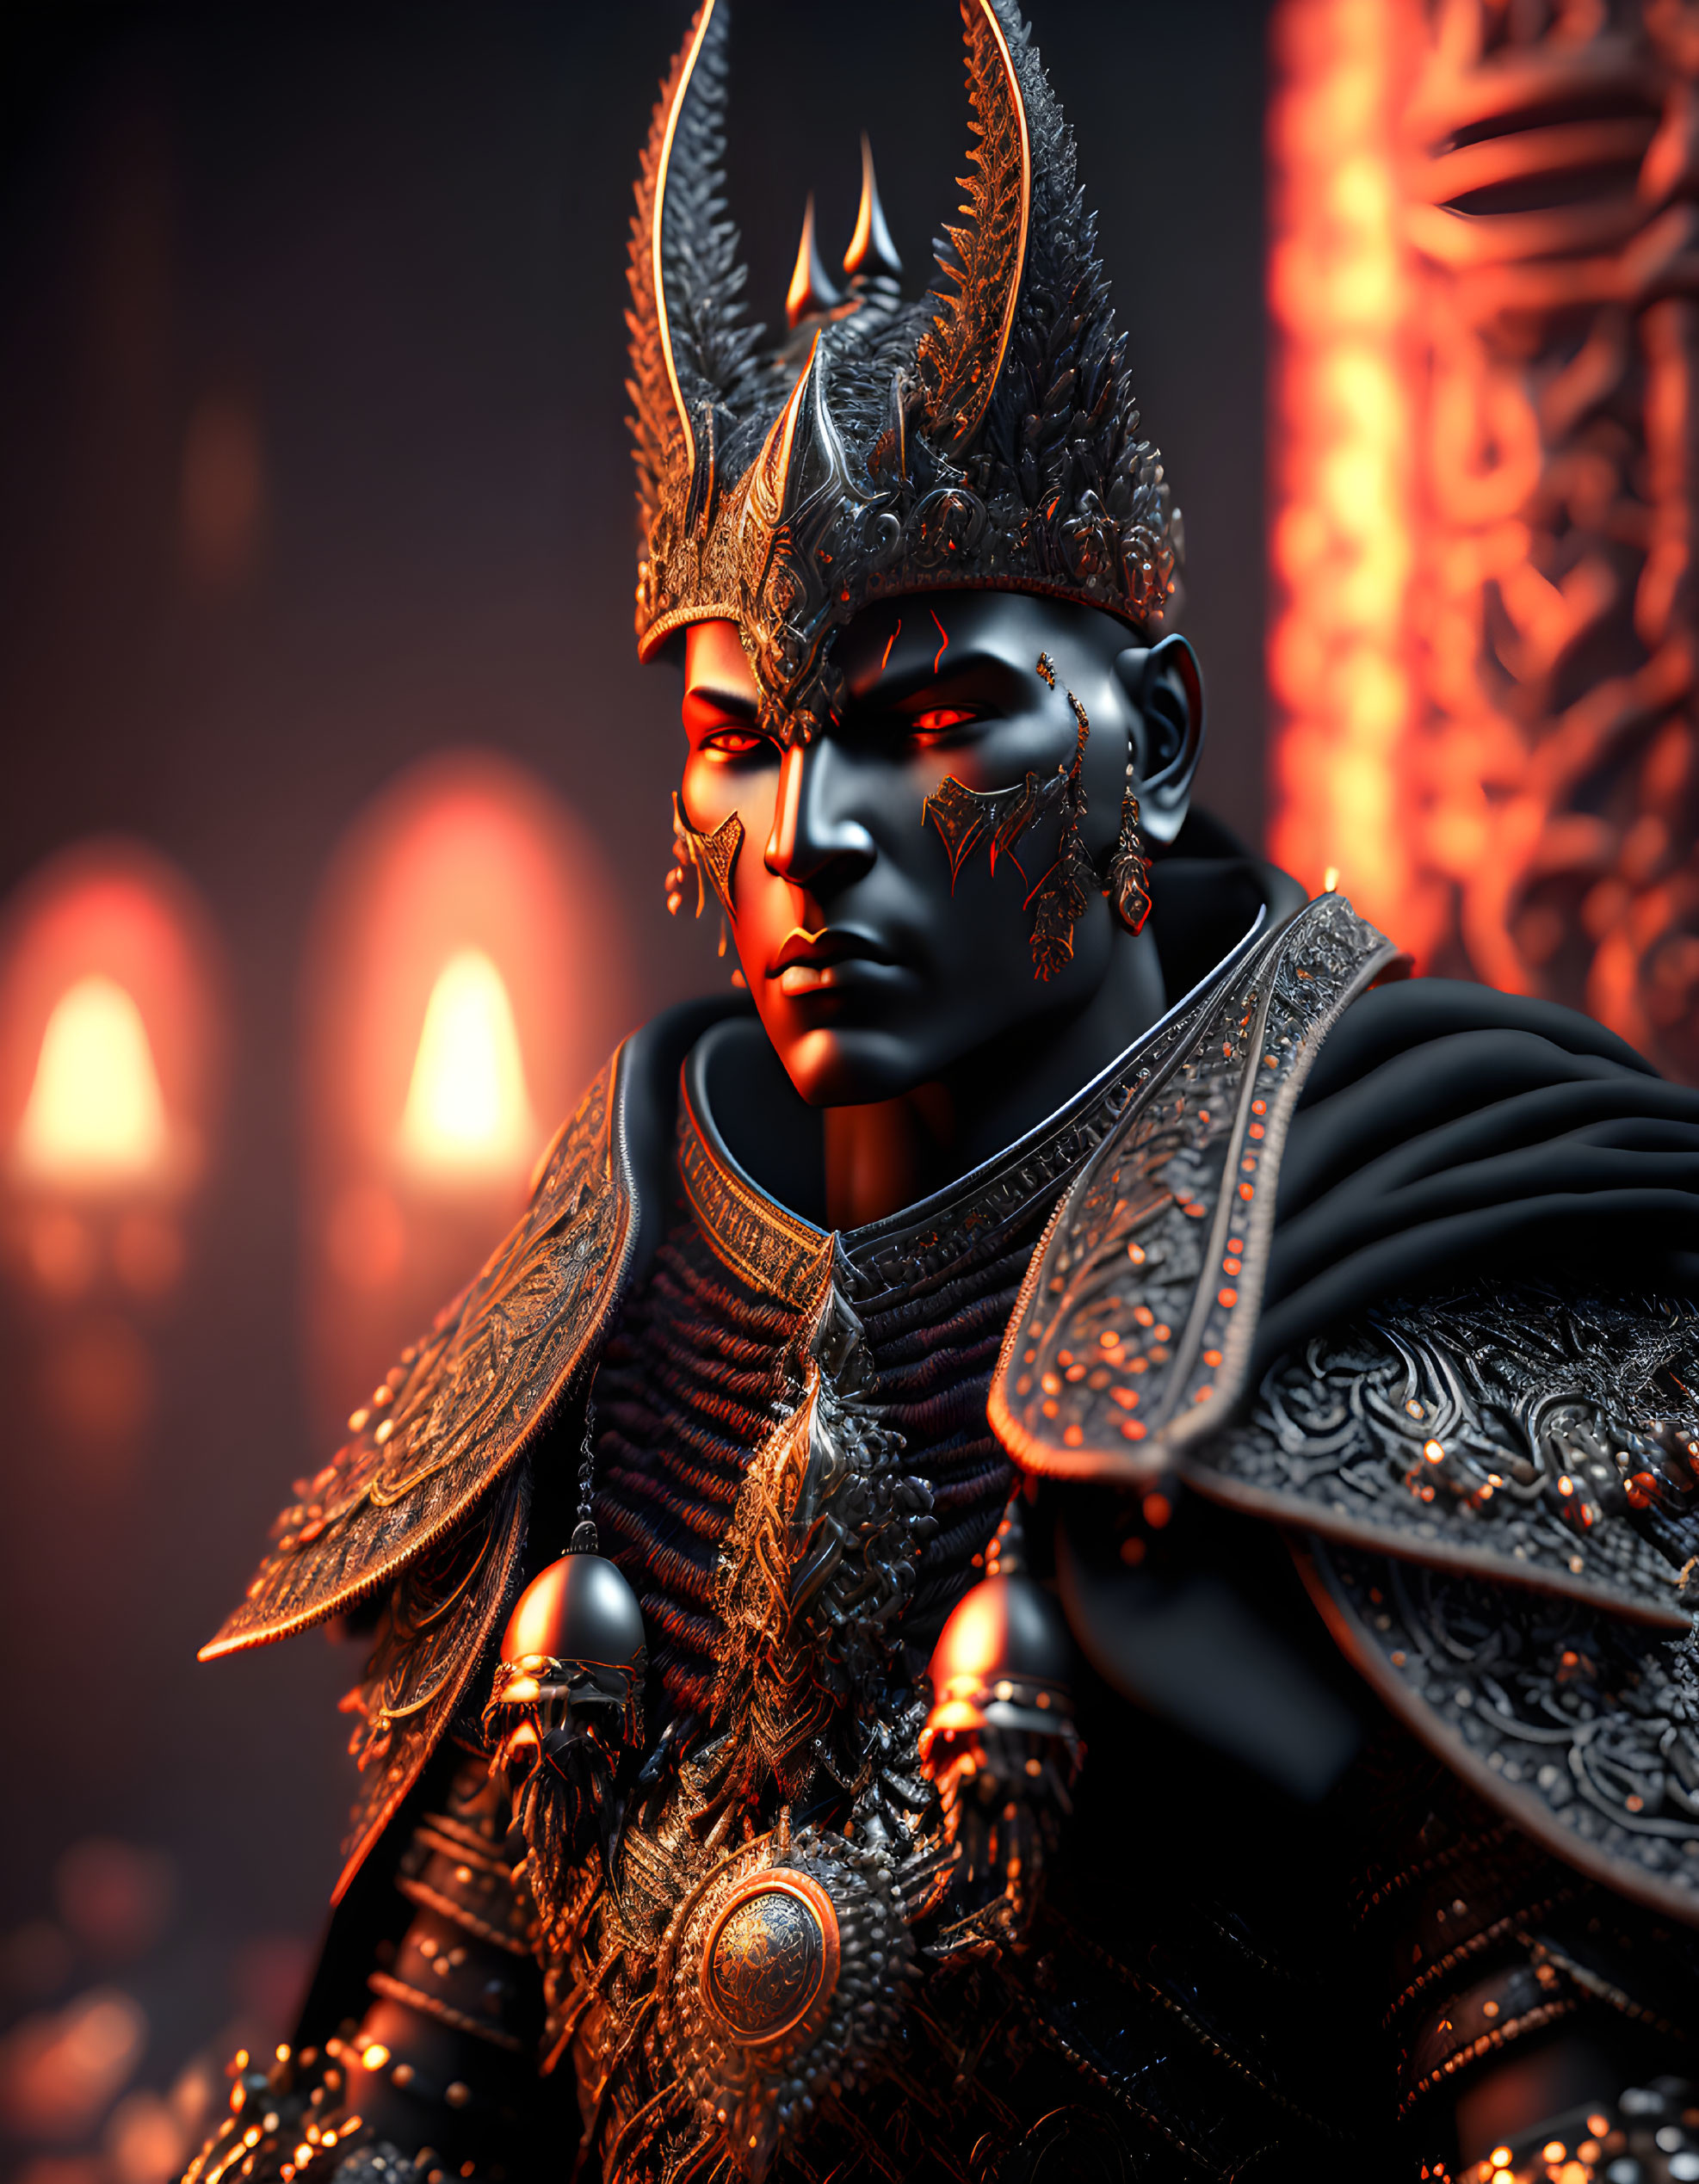 Regal figure in metallic blue armor with spiked crown against torch-lit backdrop